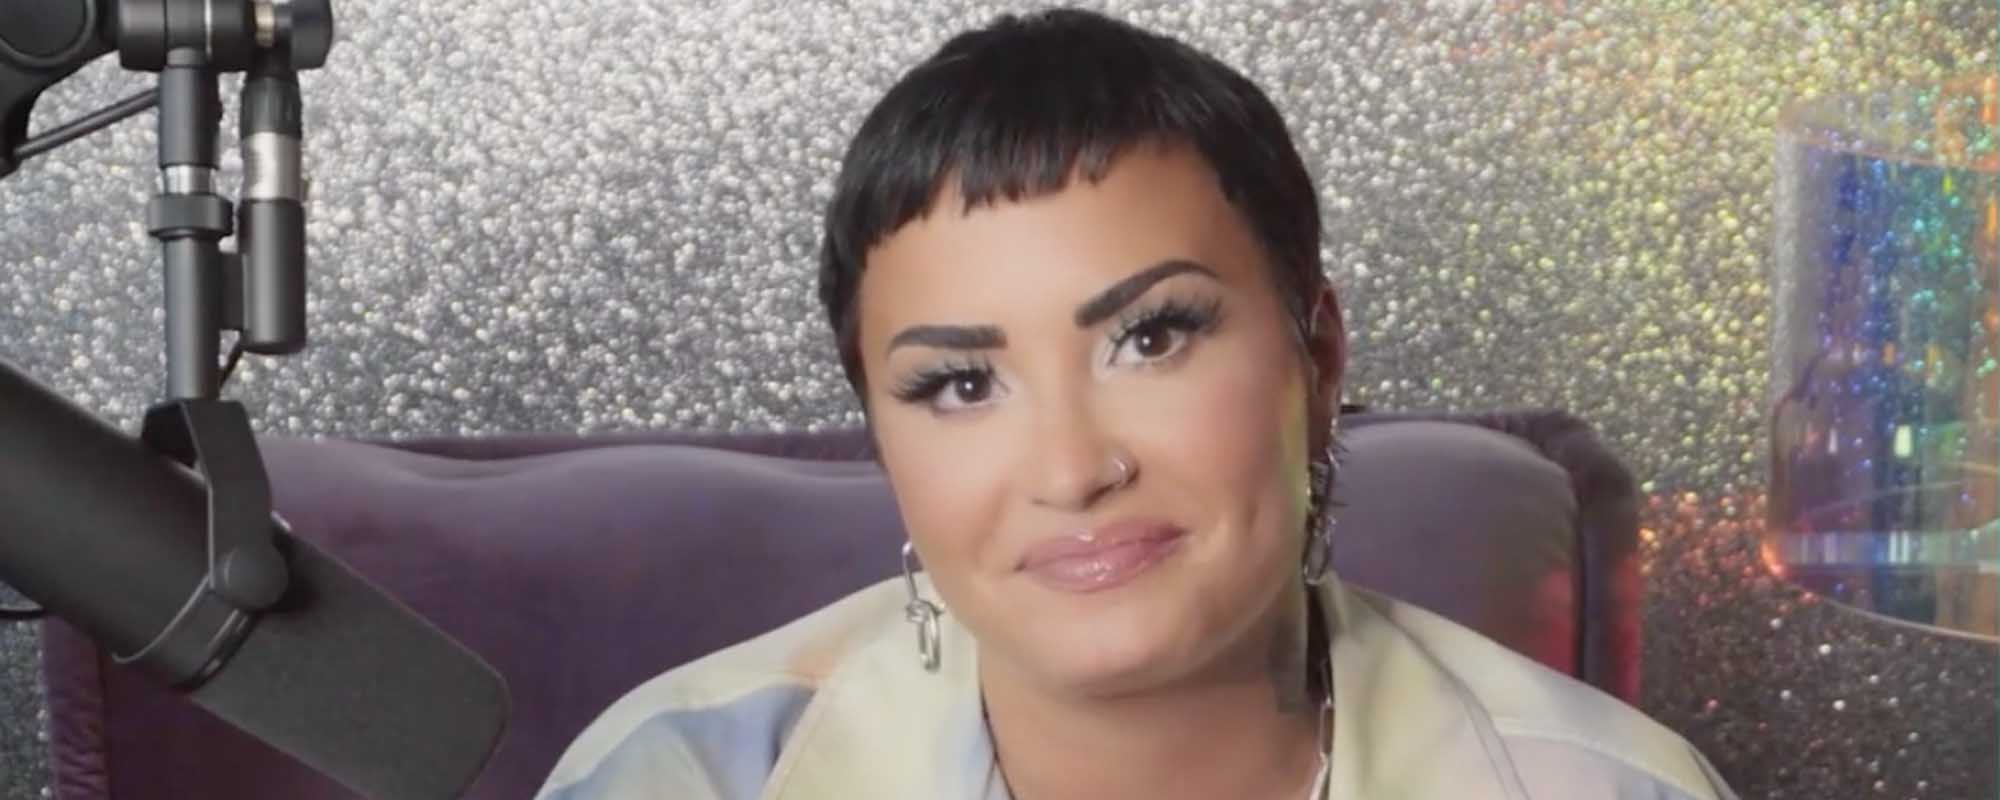 Demi Lovato, Busy Phillips, Cynthia Erivo and More End Pride Month On A High Note with New UMG x GLAAD Video “Pronouns Matter”